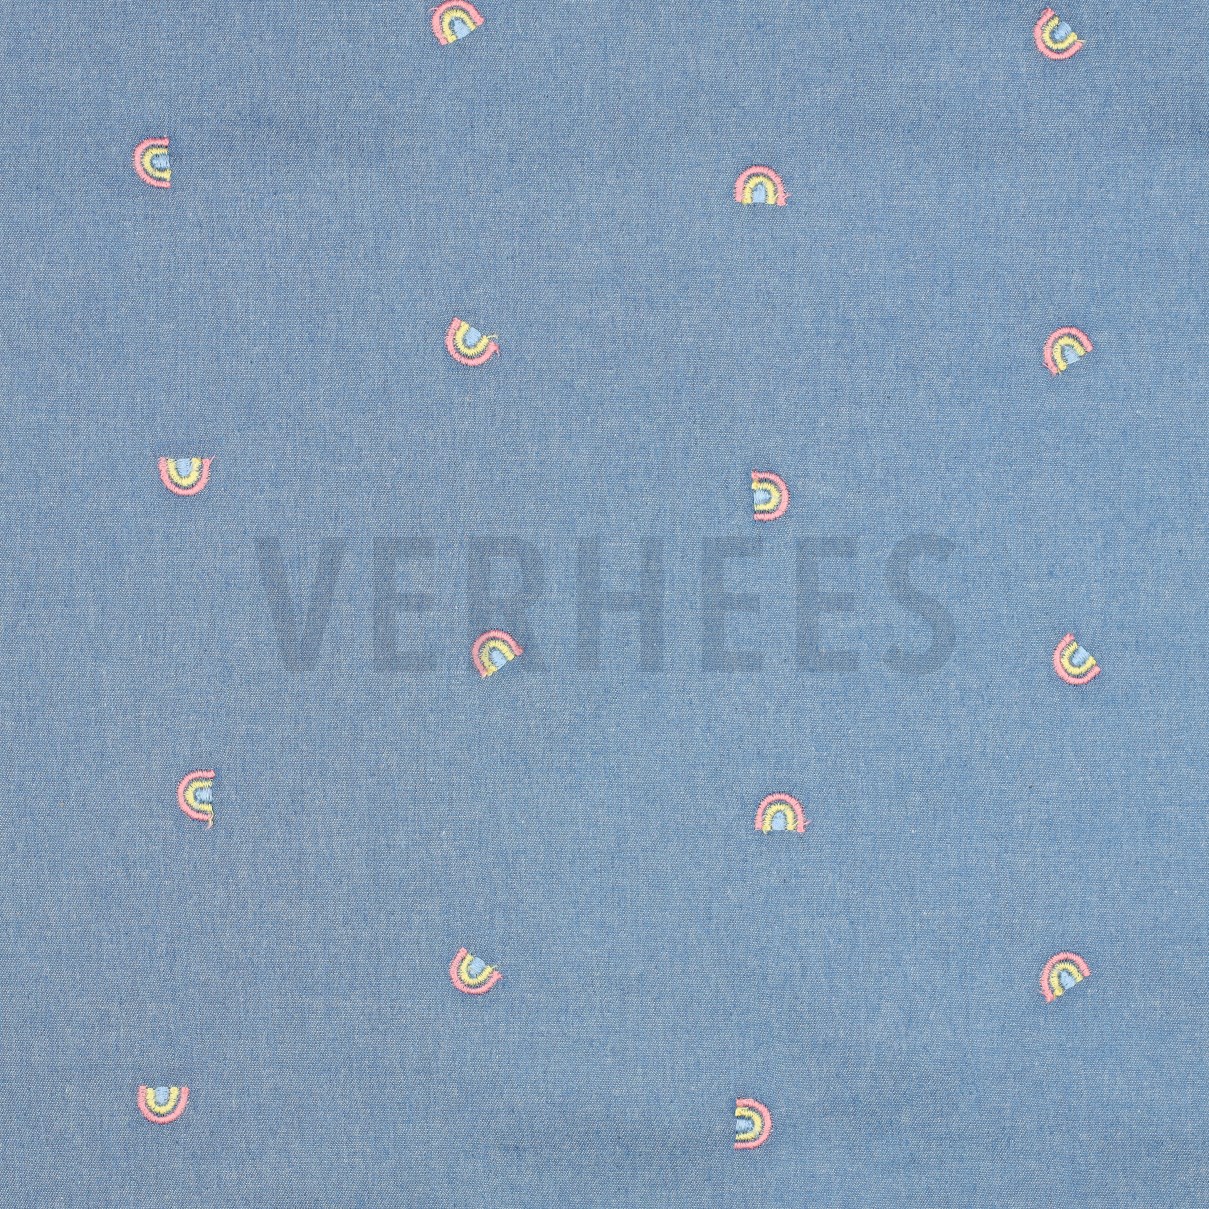 JEANS EMBROIDERY BLEACHED (high resolution)